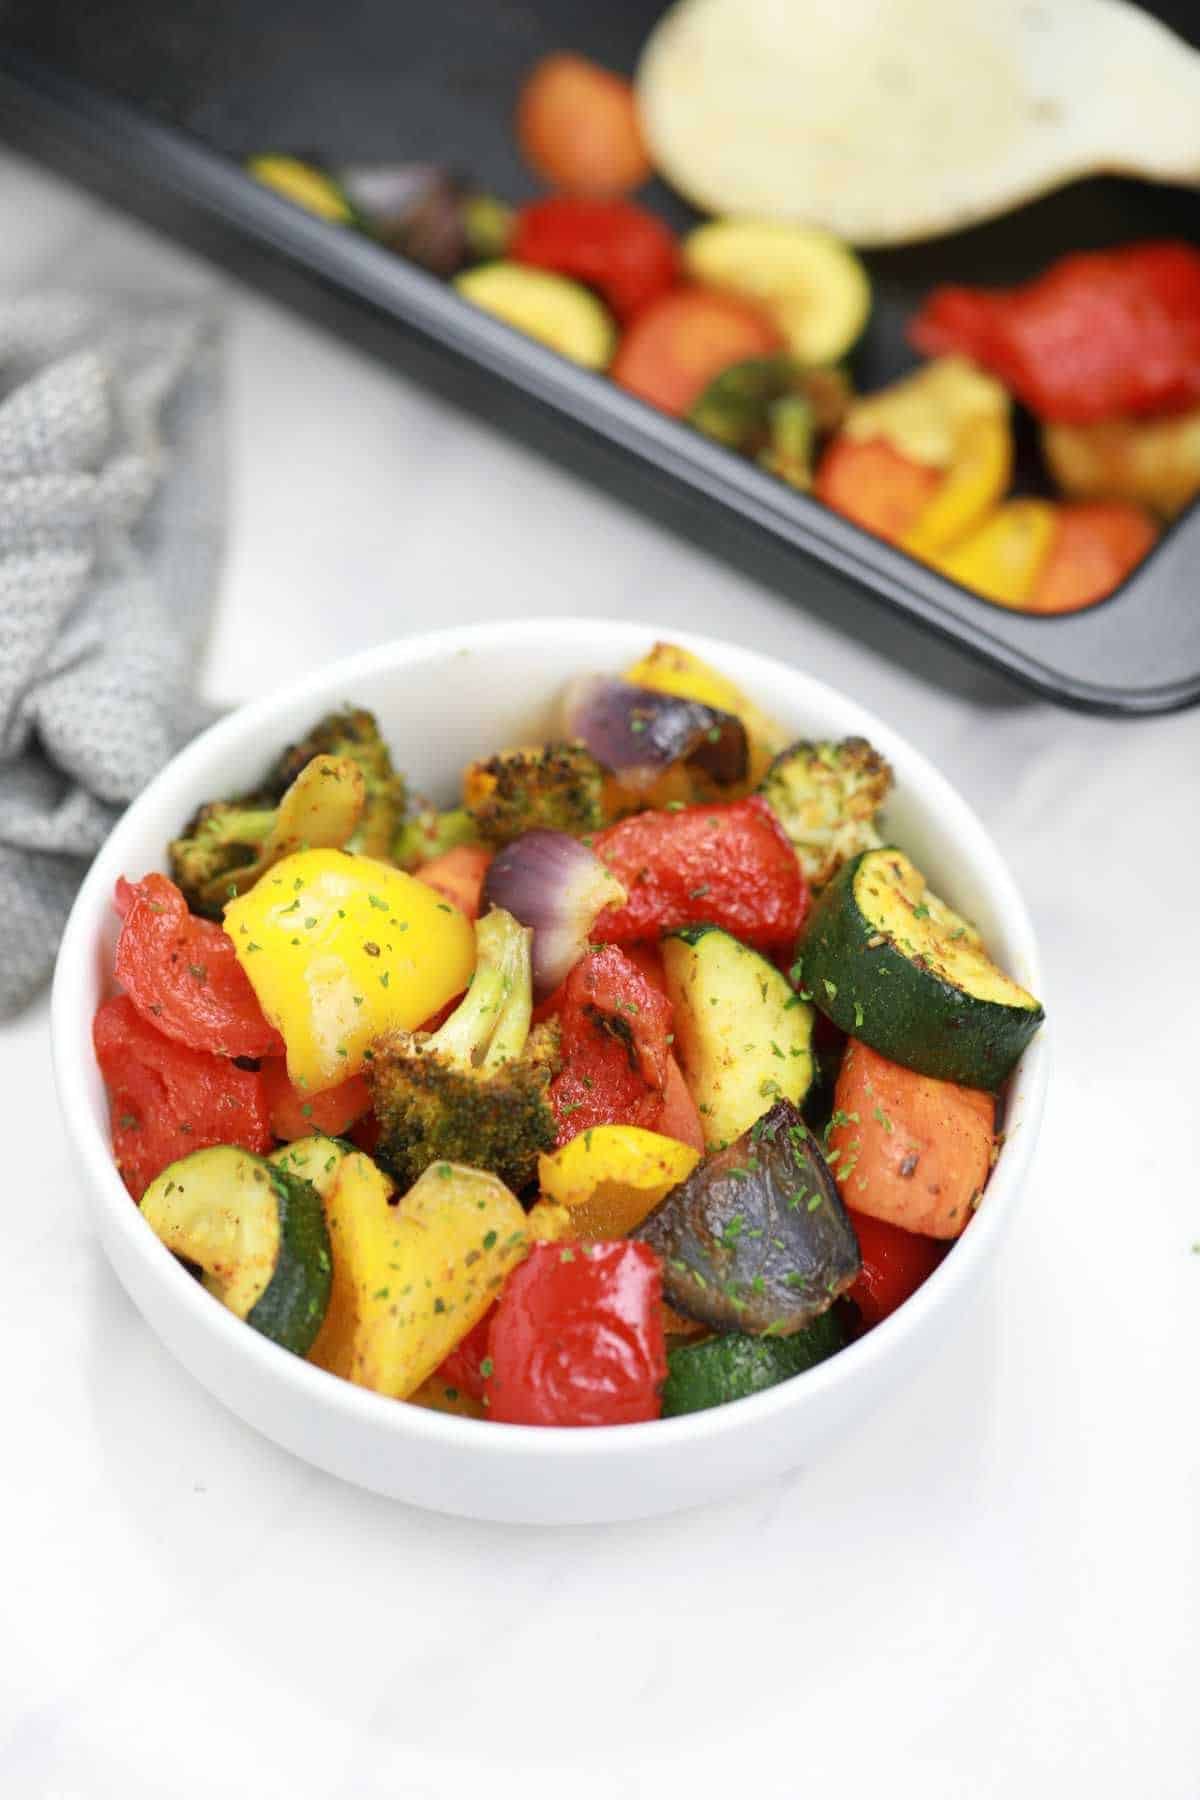 baked vegetables served in a white plate.